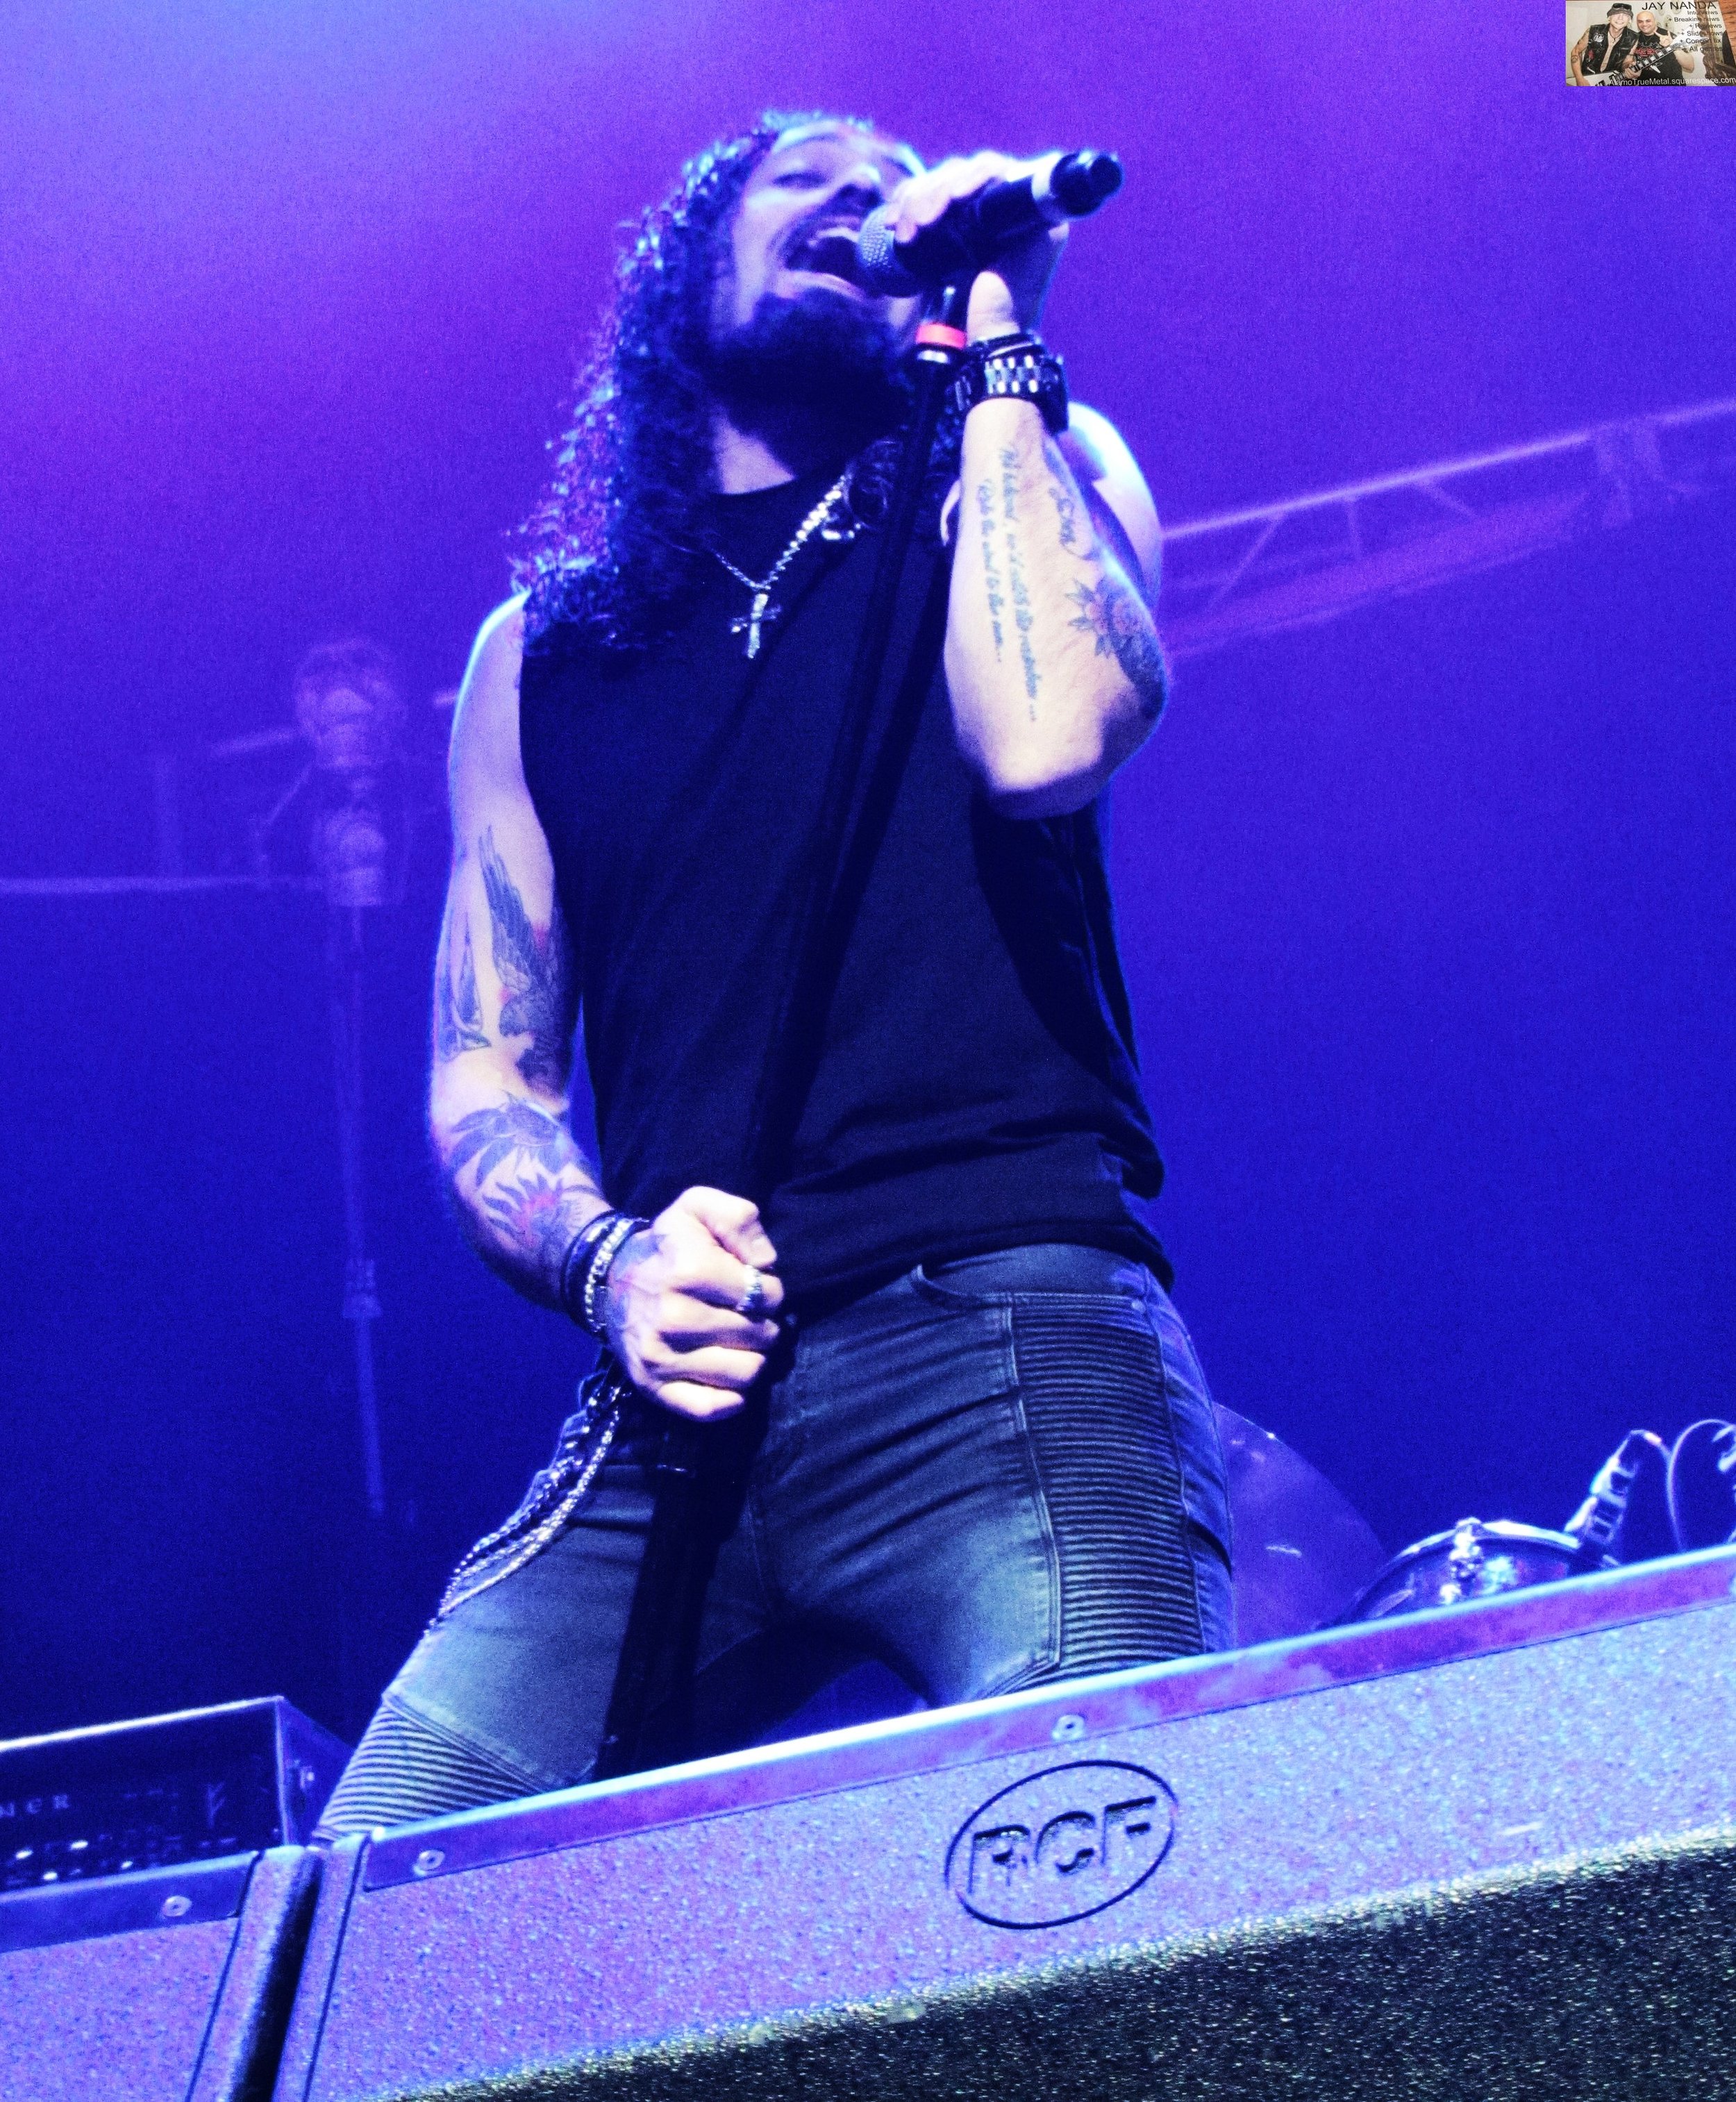  Ronnie Romero is the lead vocalist on the latest lineup employed by Schenker.  